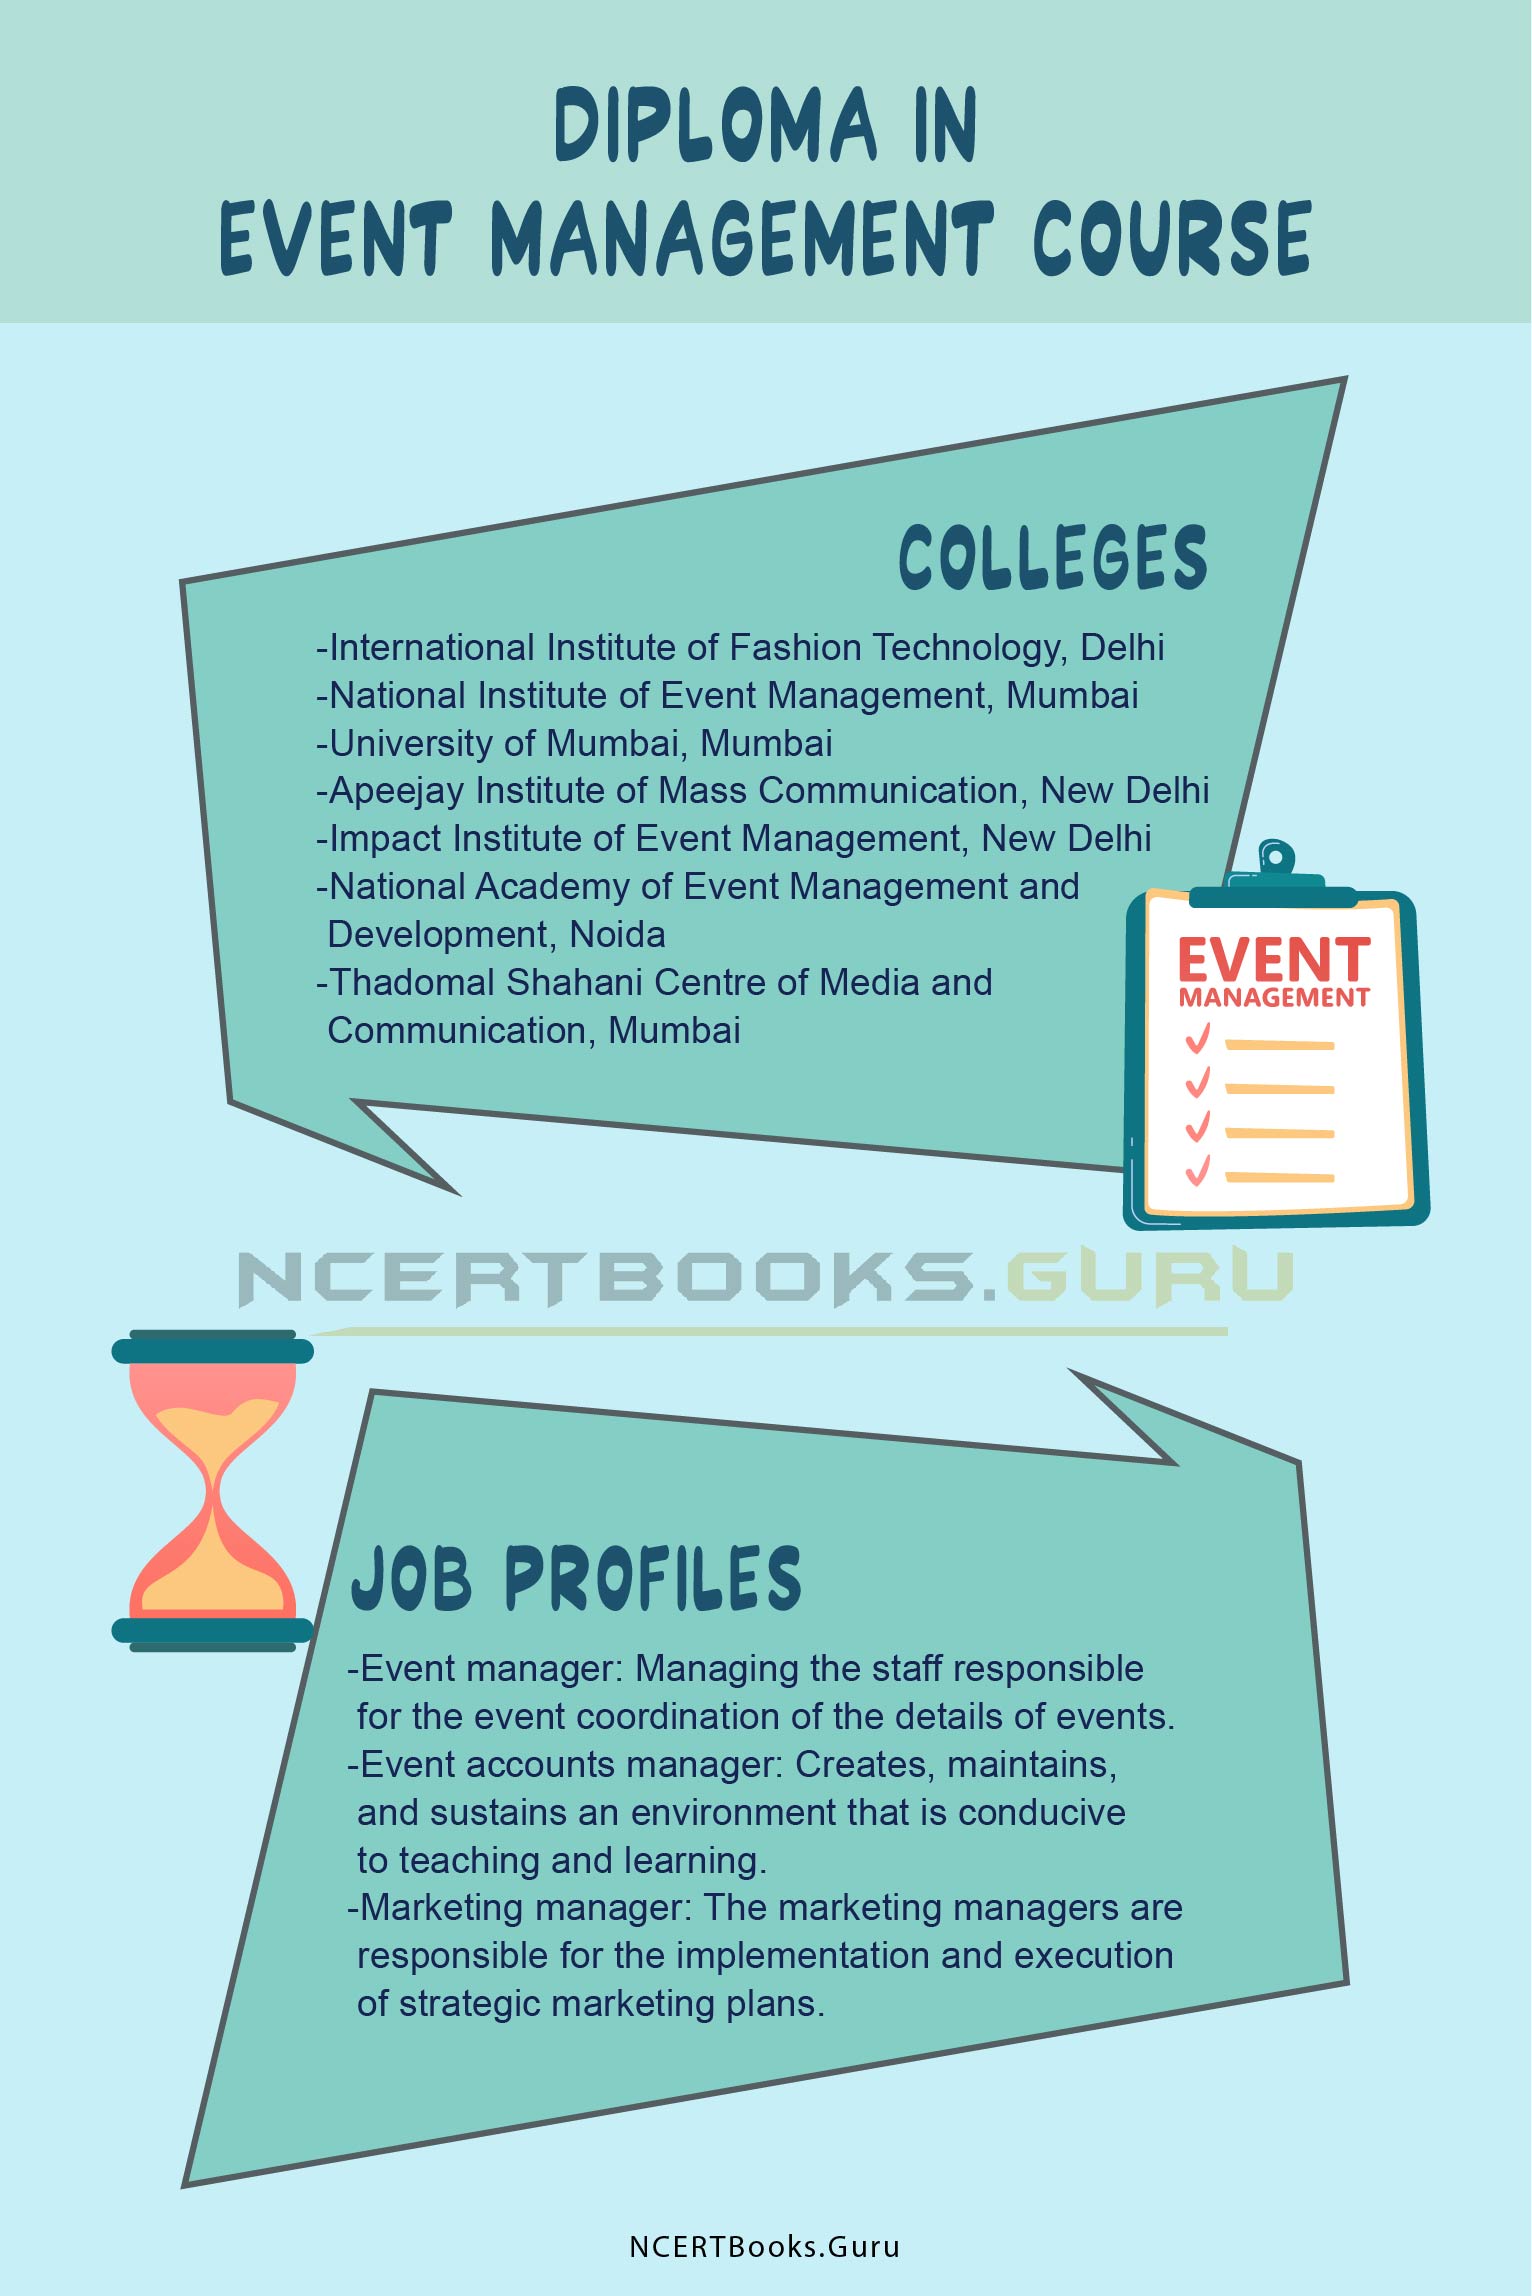 Diploma in Event Management Course Details